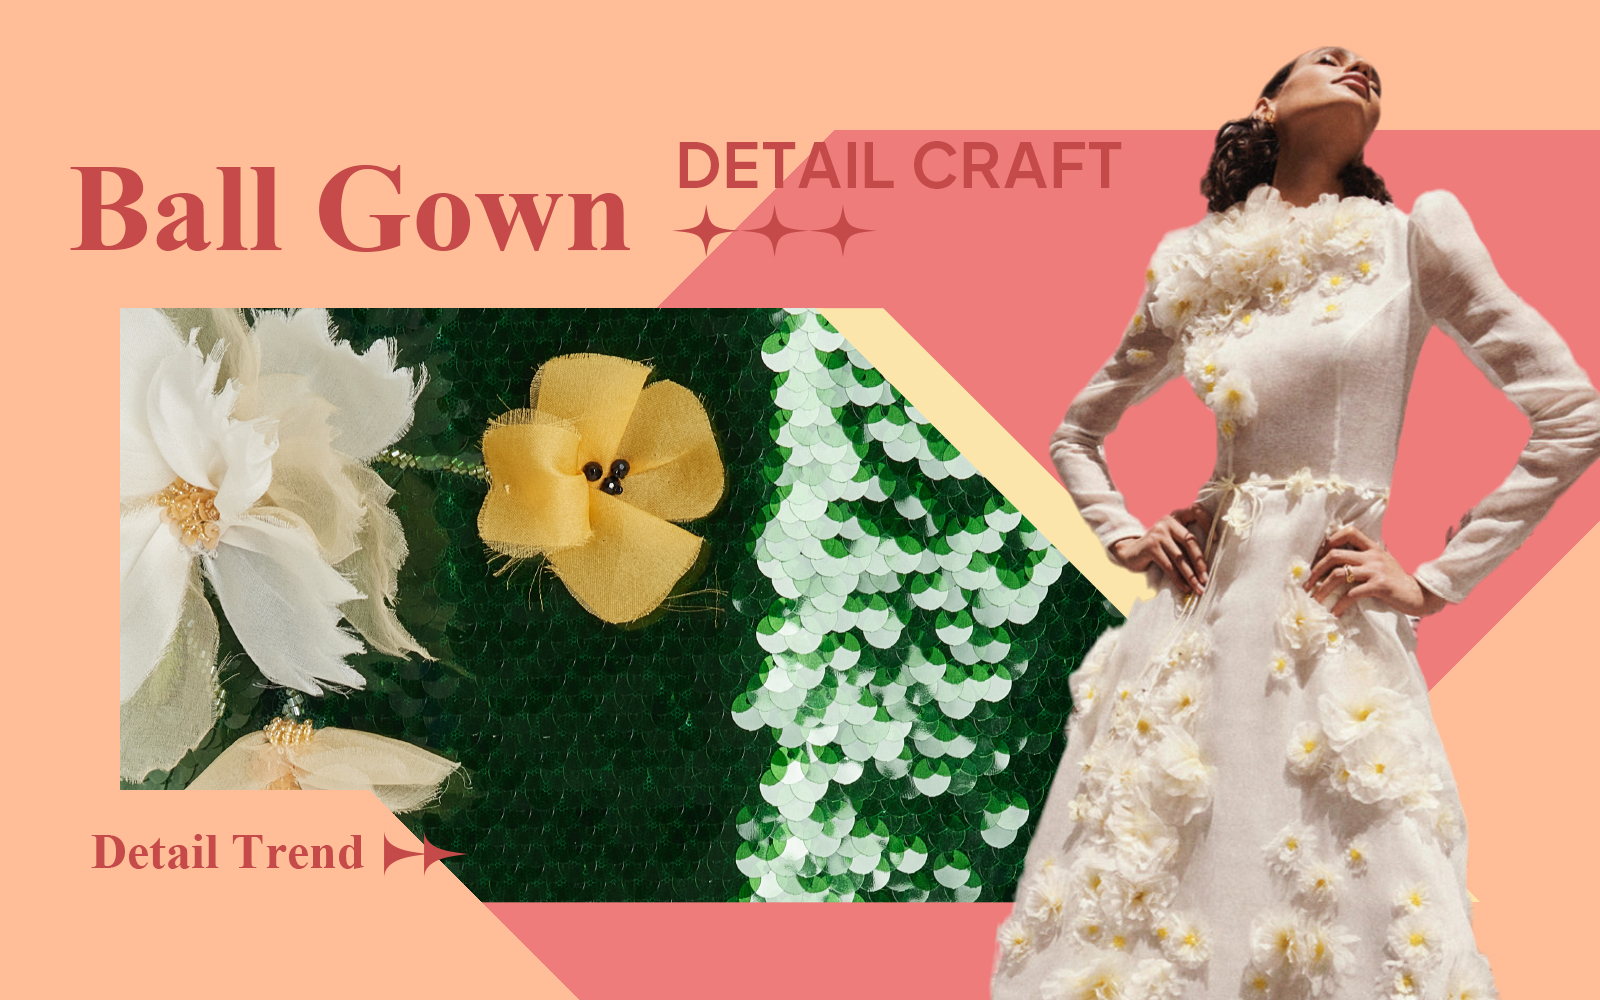 Flowers and Light -- The Detail & Craft Trend for Women's Ball Gown